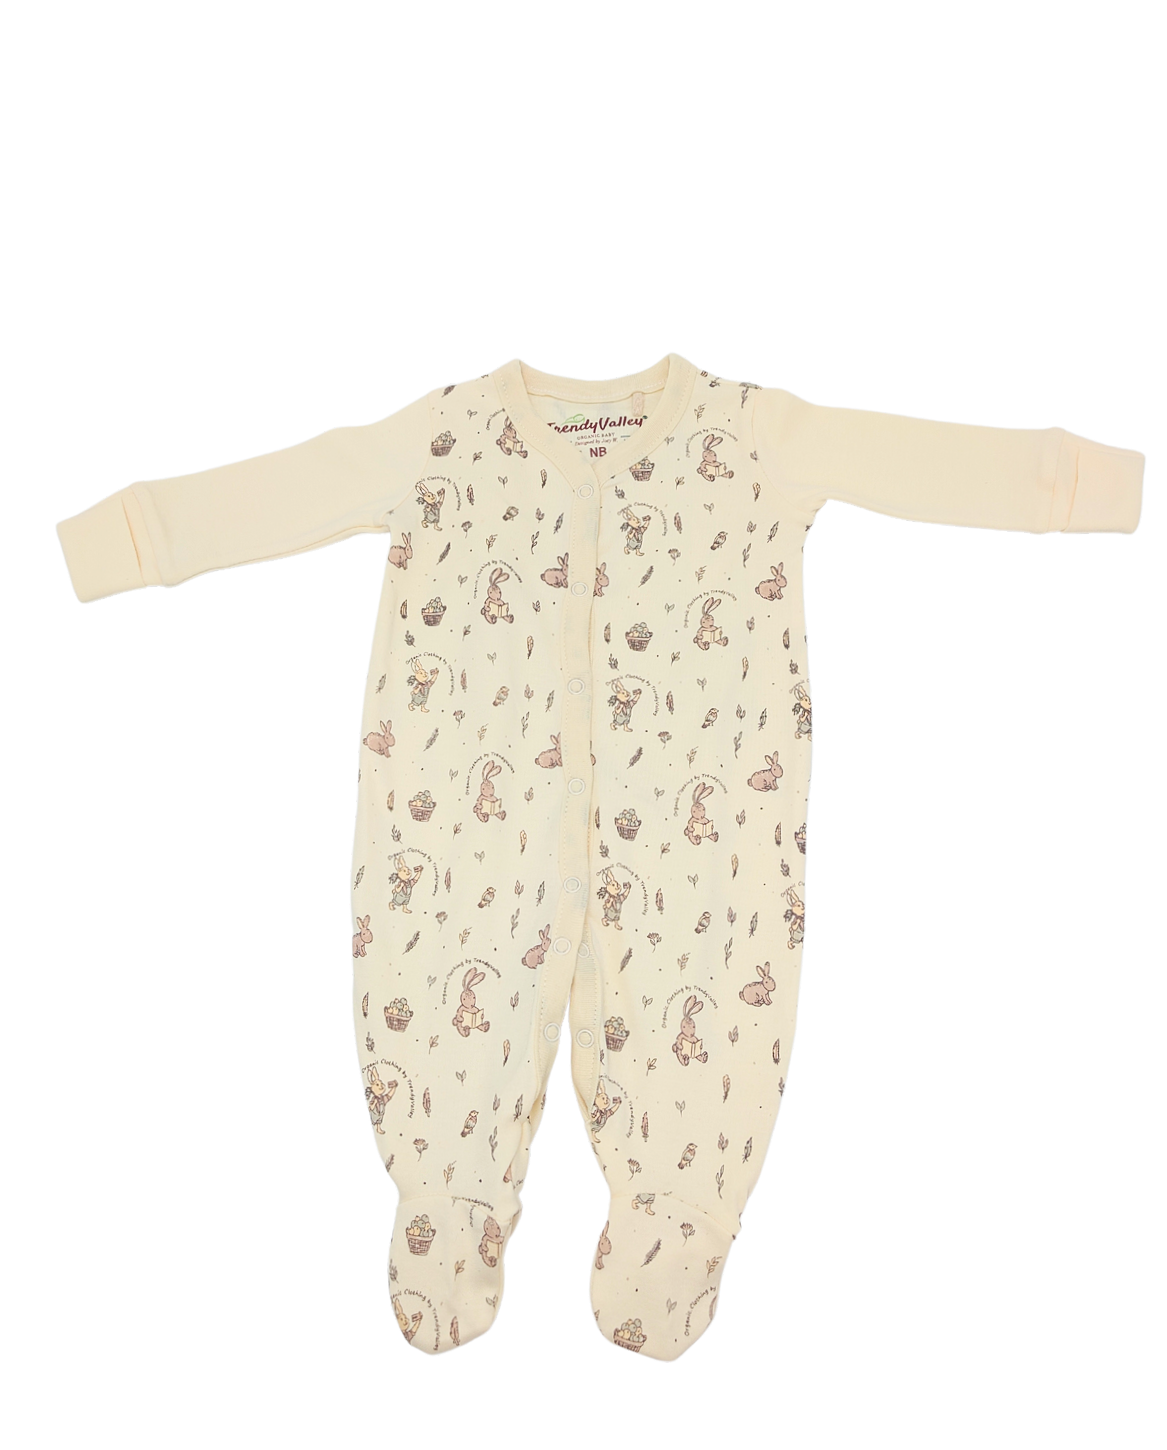 Trendyvalley Organic Cotton One Piece Suit Romper With Hands and Feet Covered Printed Design